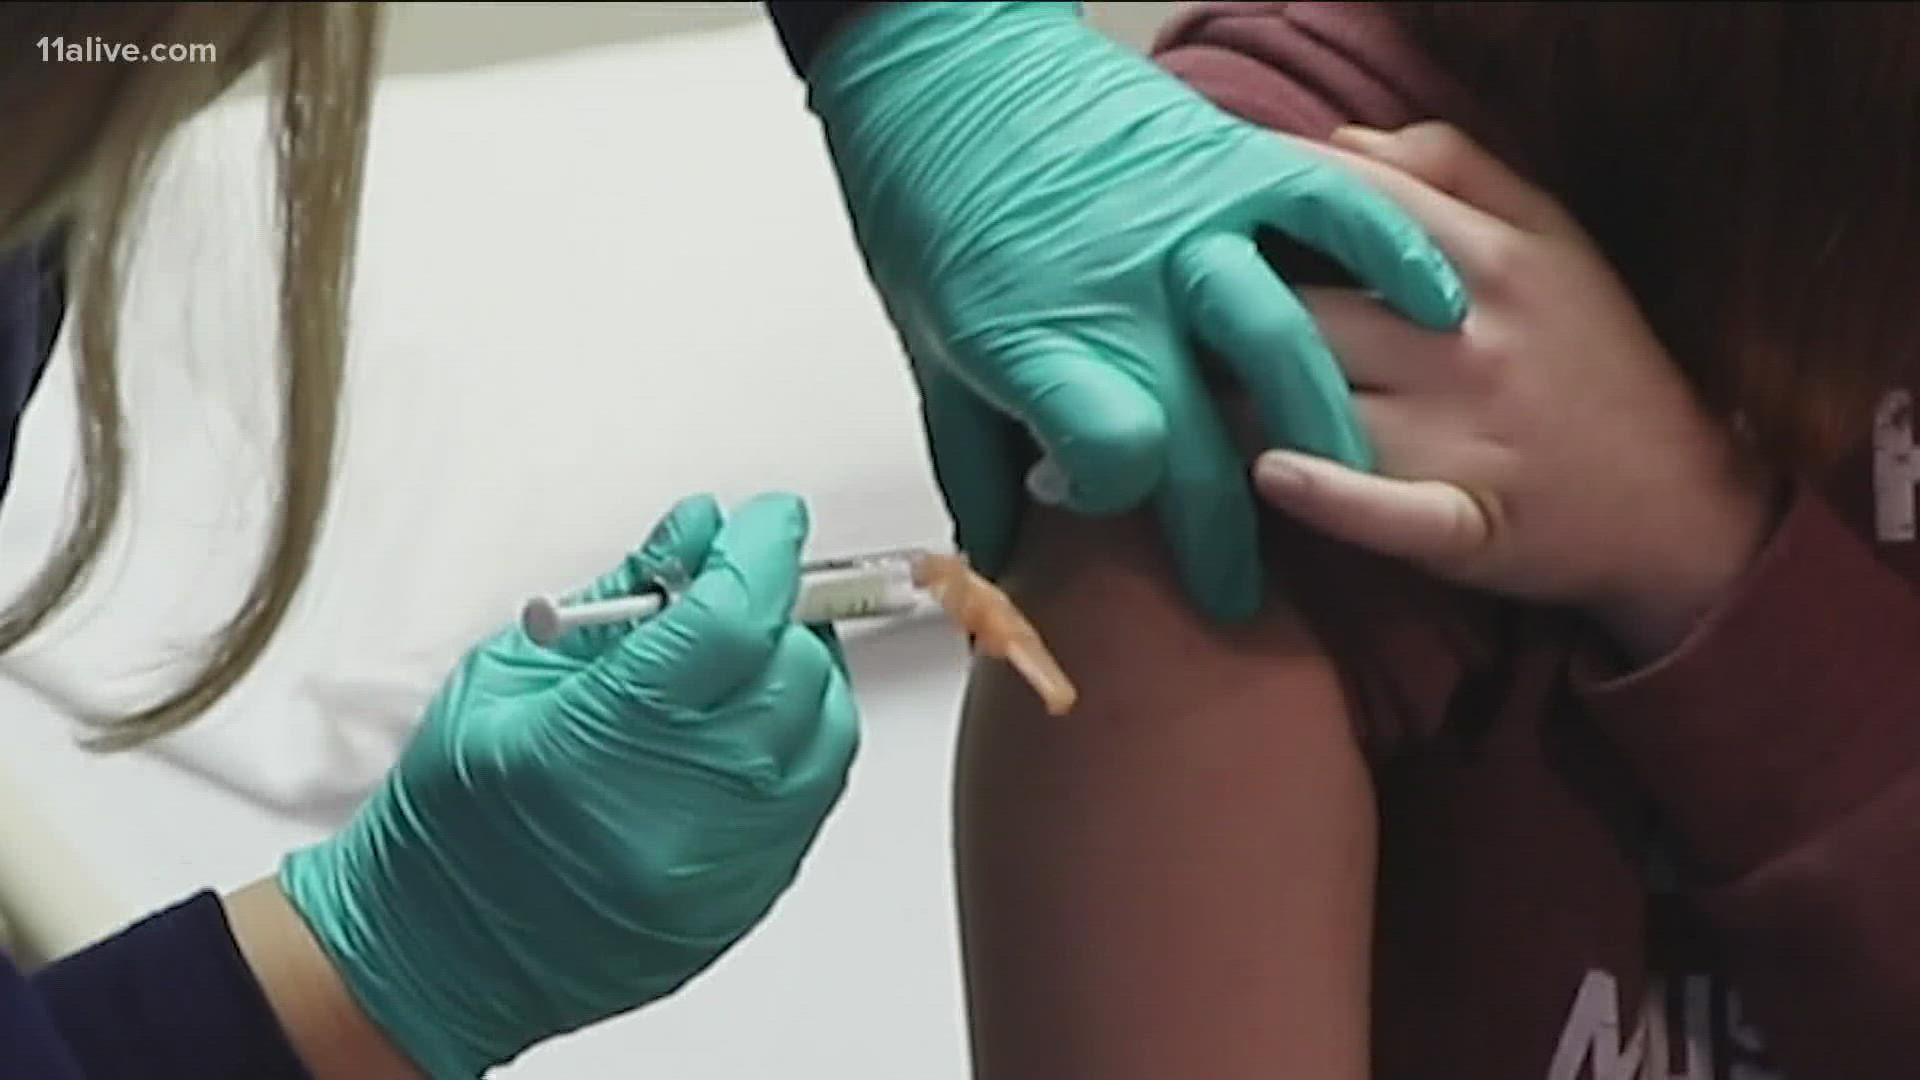 Twelve months later, nearly 5.5 million Georgians are fully vaccinated